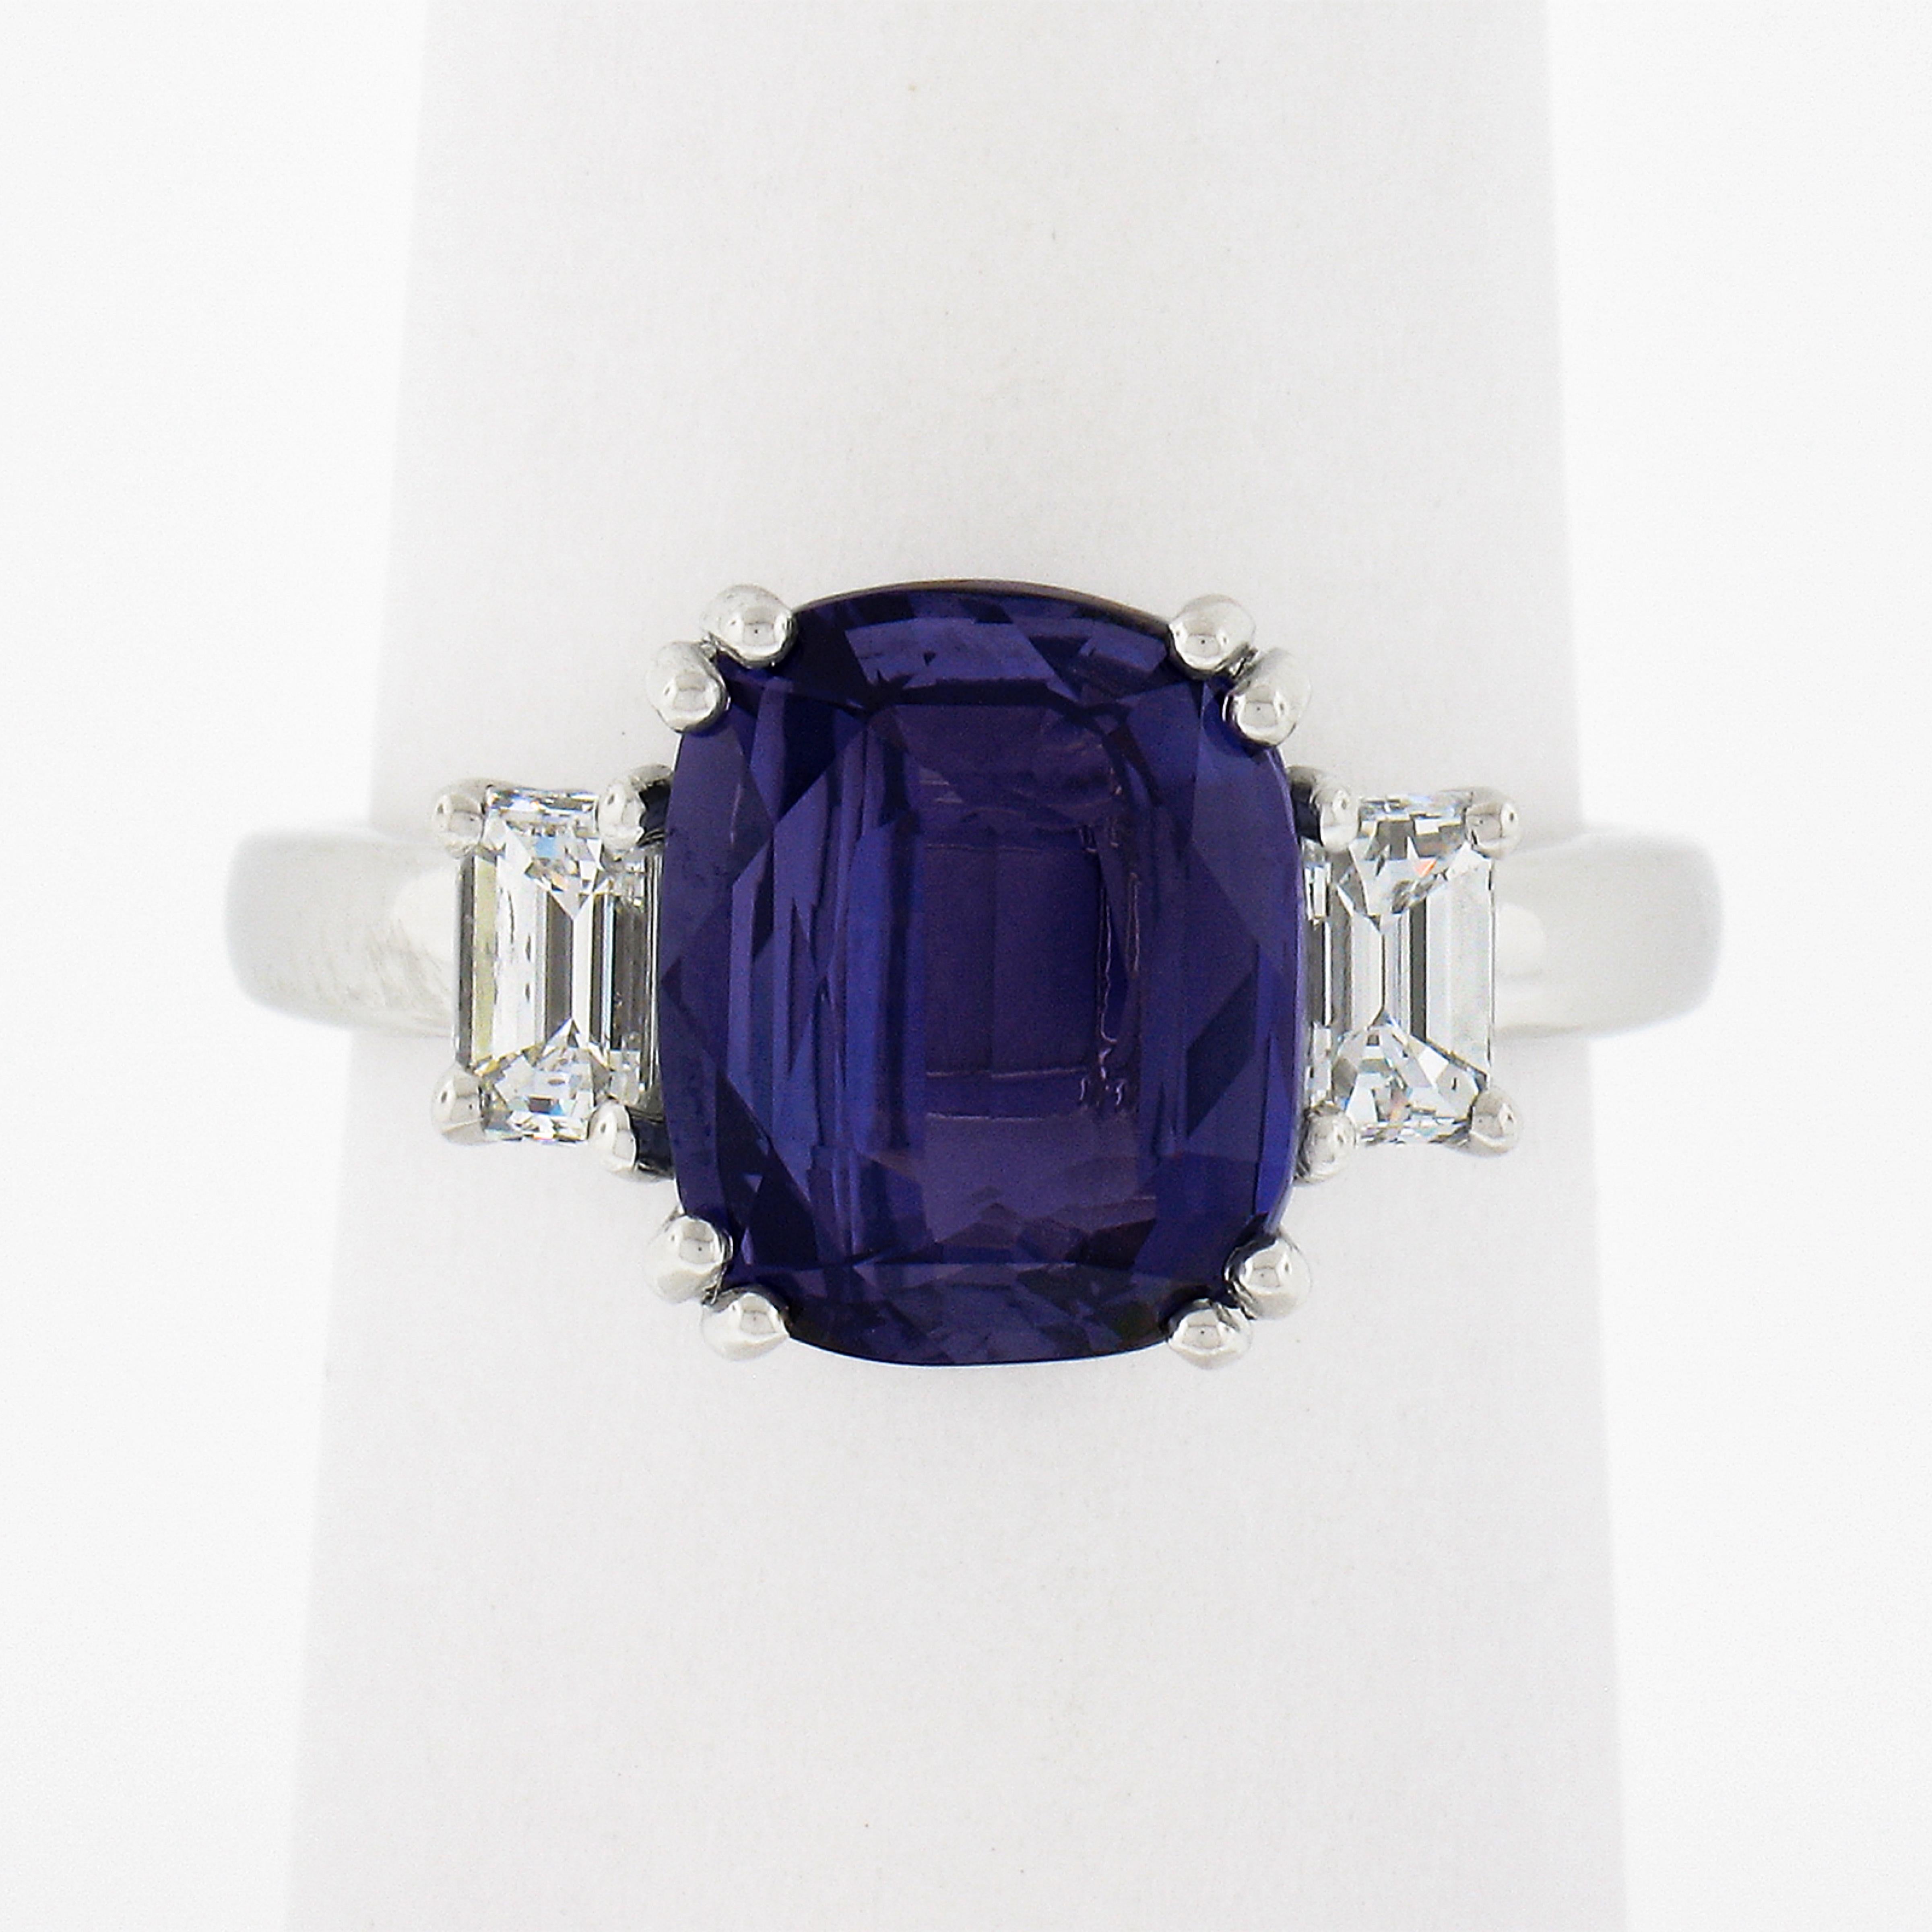 This very unique sapphire and diamond custom made engagement ring is crafted in solid platinum and features a gorgeous GIA certified, 4.06 carat cushion cut color change sapphire solitaire, neatly prong set in the center and flanked on either side